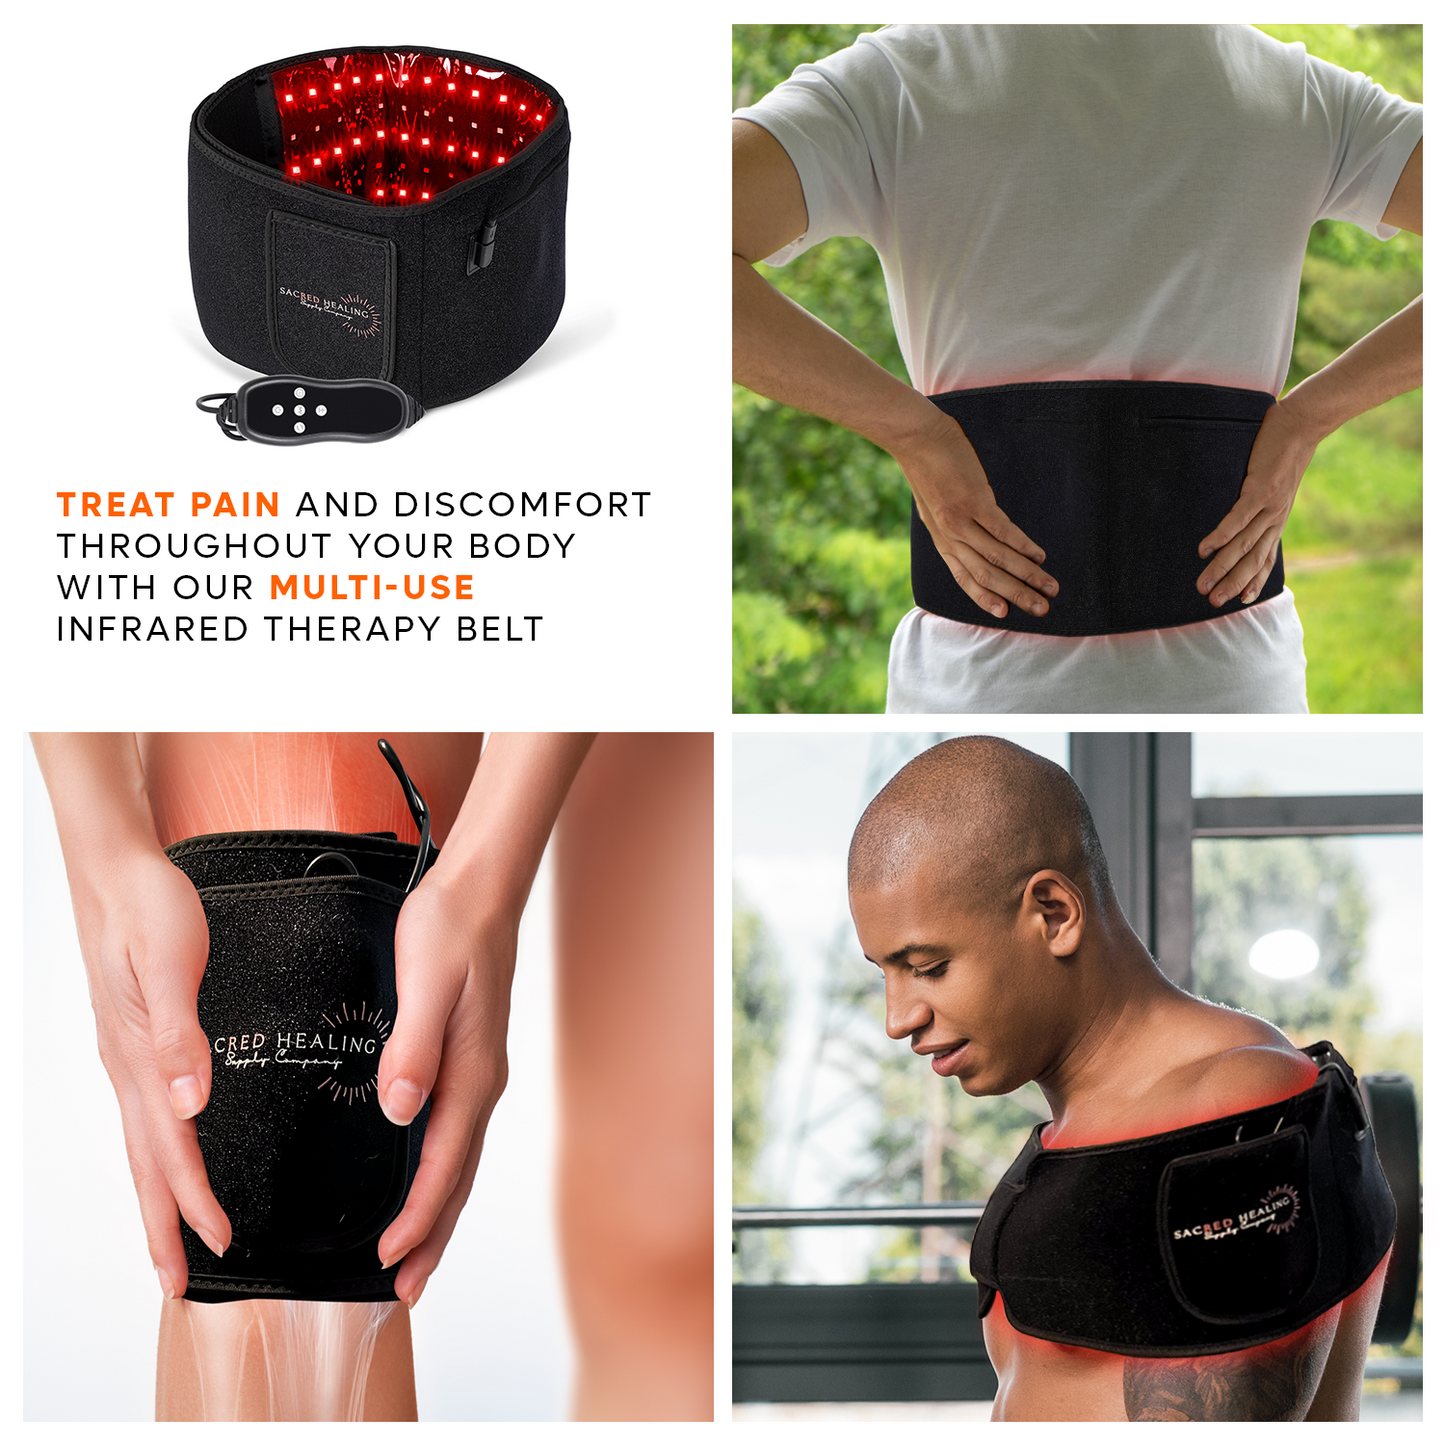 Sacred Healing Medical Grade Infrared + Red Light Therapy Belt